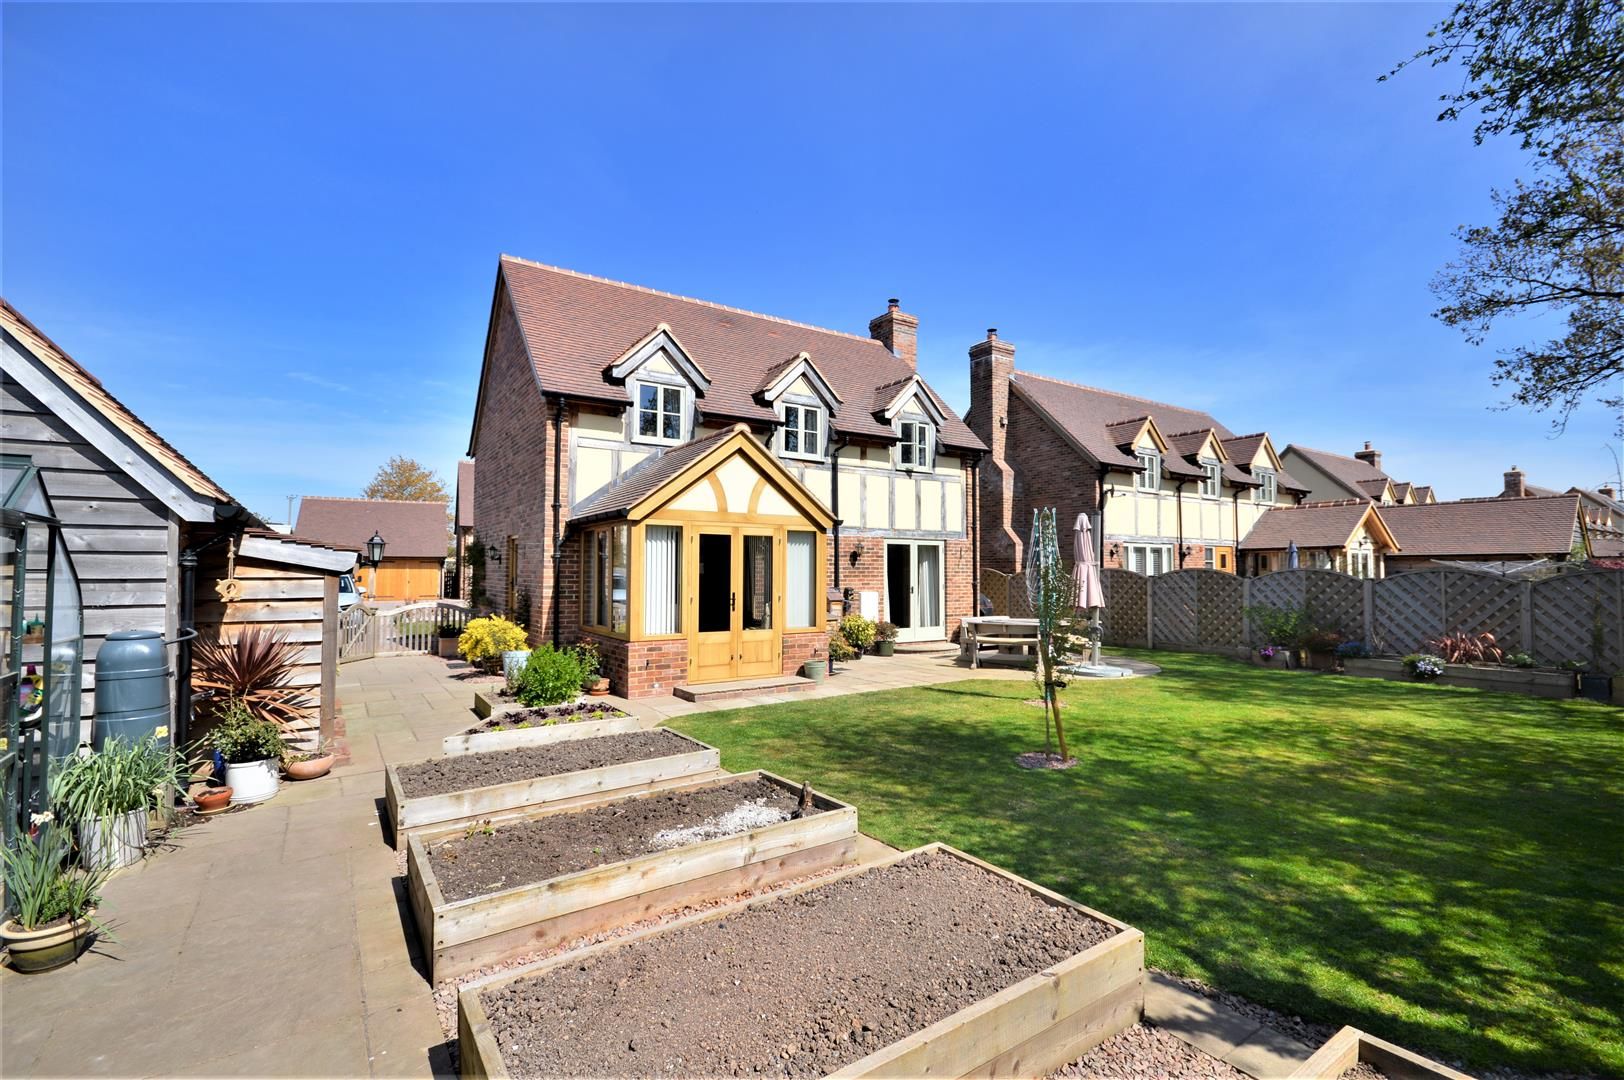 3 bed detached for sale in Winforton 2